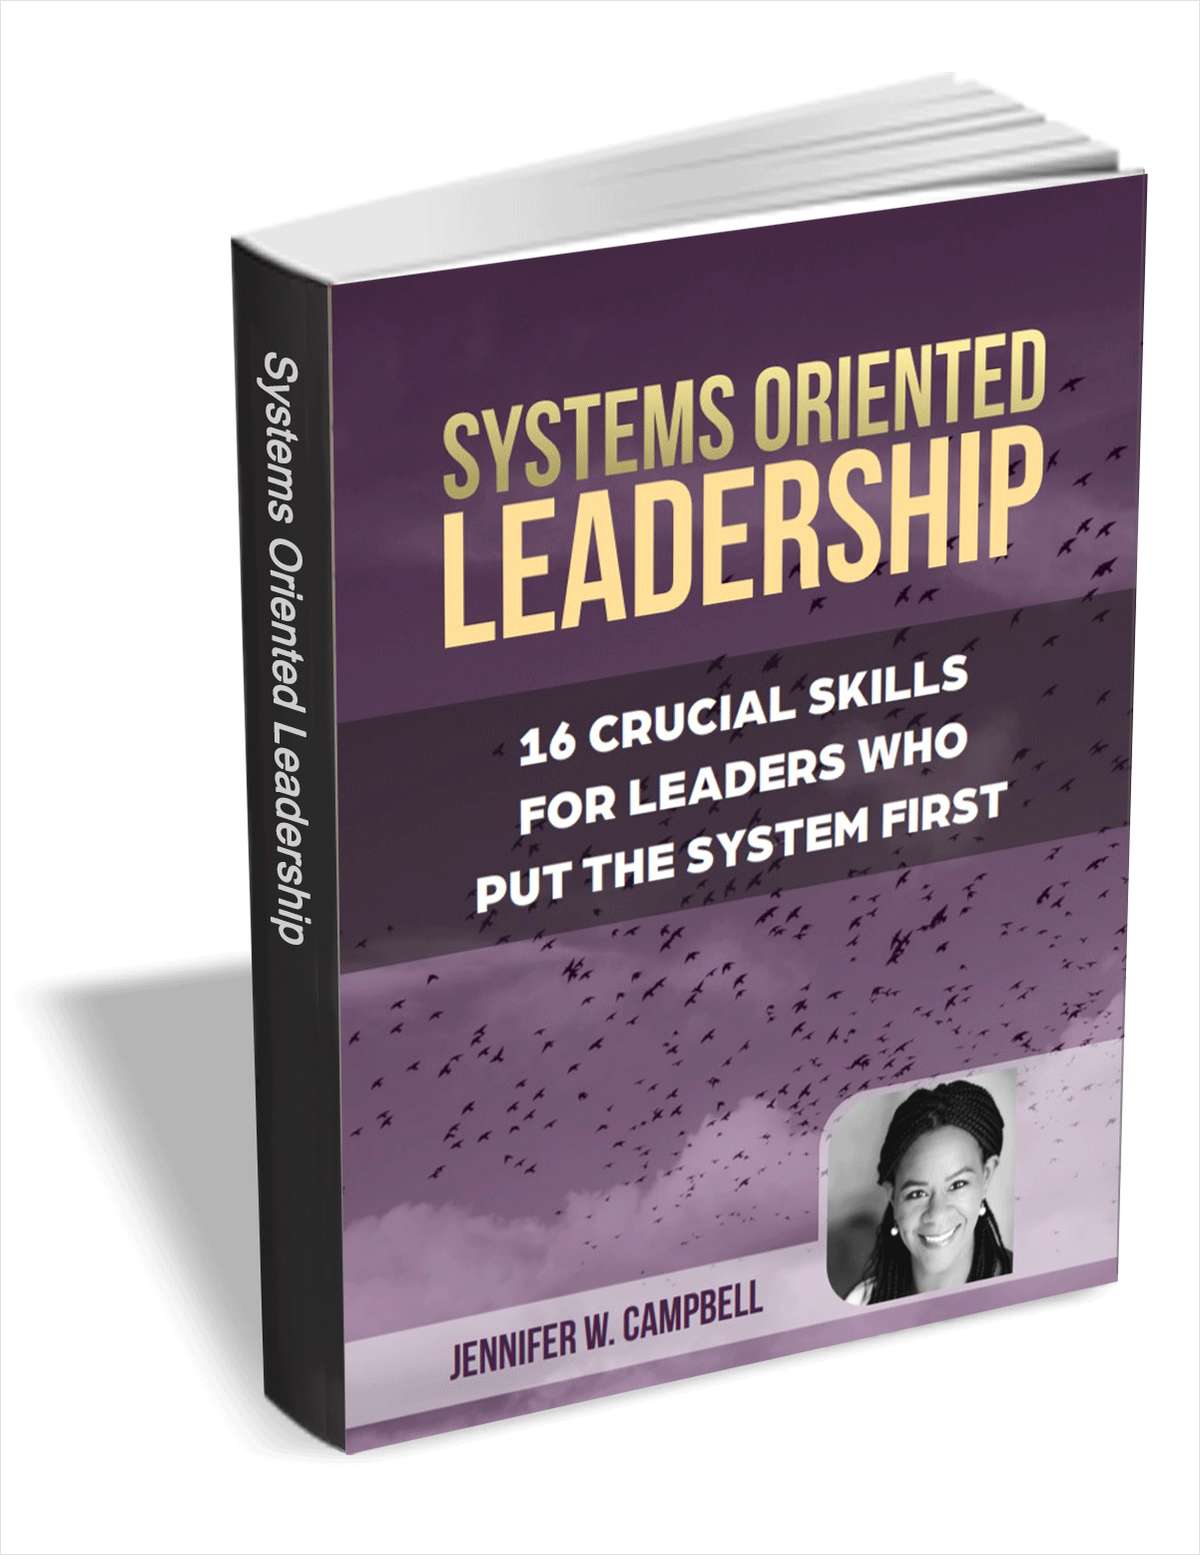 Systems Oriented Leadership - 16 Crucial Skills for Leaders Who Put the System First